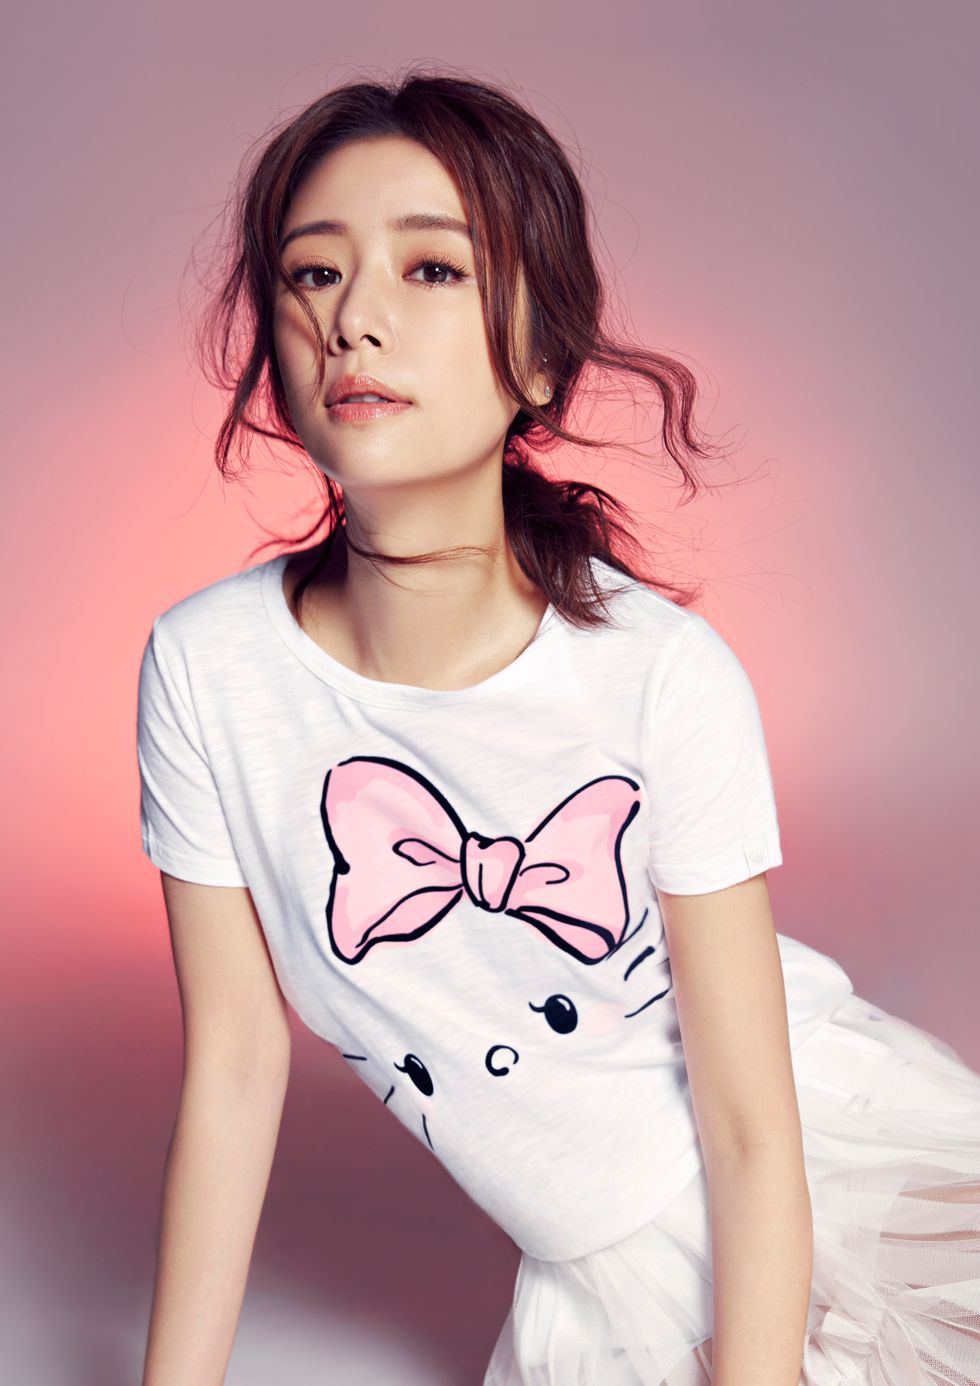 White, Pink, Skin, Clothing, Beauty, T-shirt, Neck, Lip, Forehead, Shoulder, 